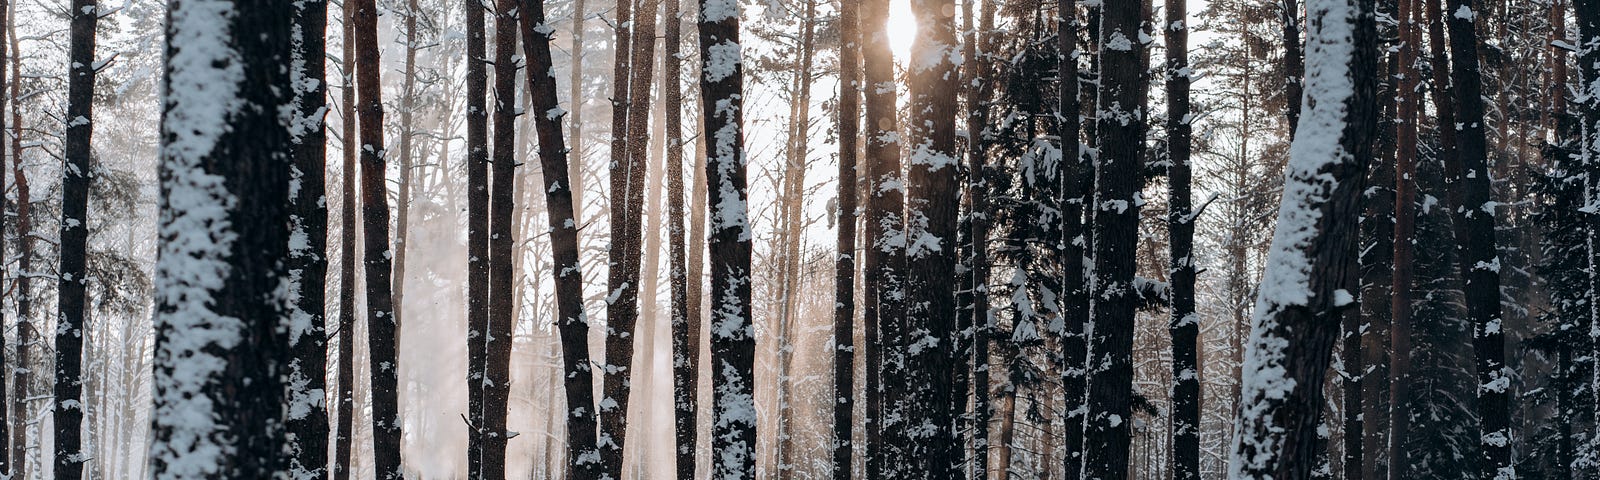 Sun barely peeking through the trees in a snow covered forest.